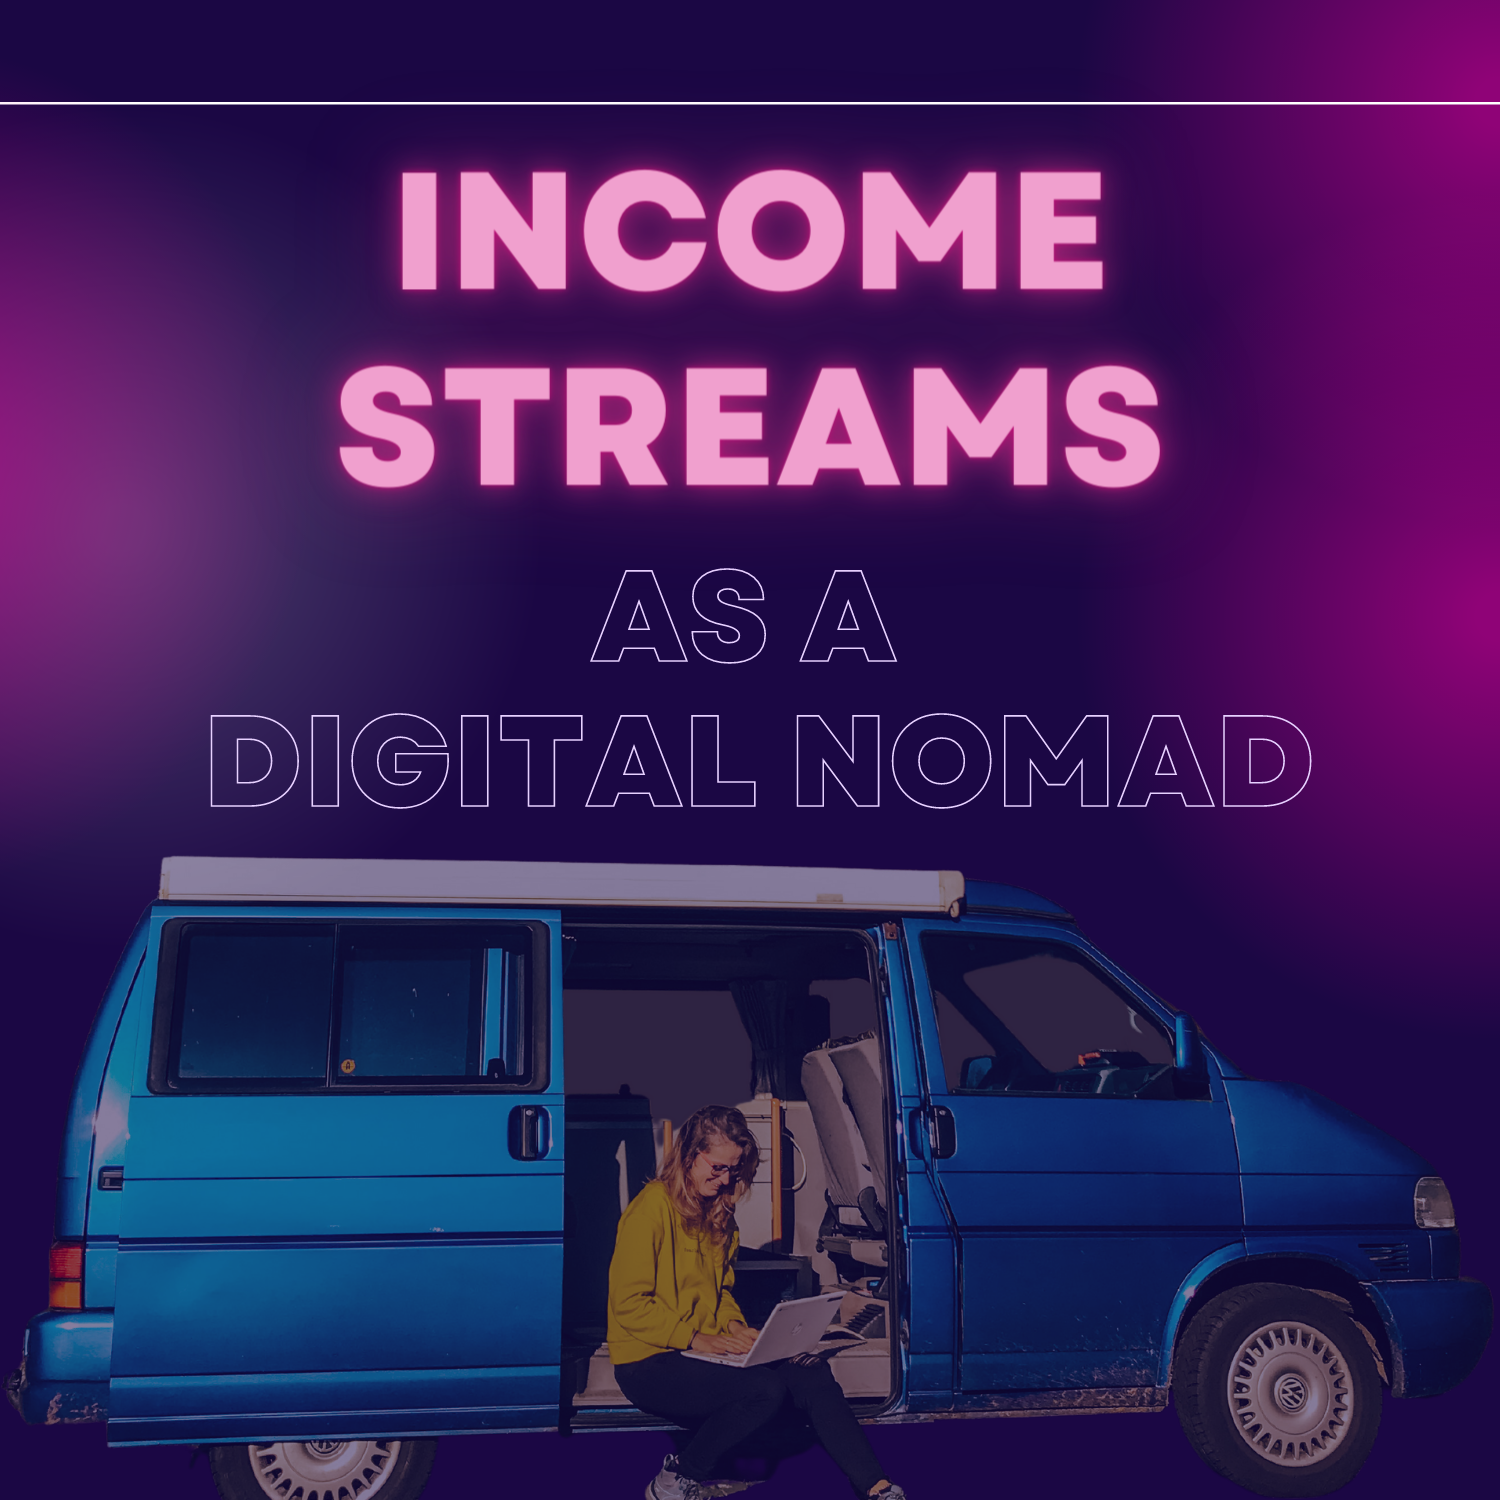 Different Income streams as a Digital Nomad